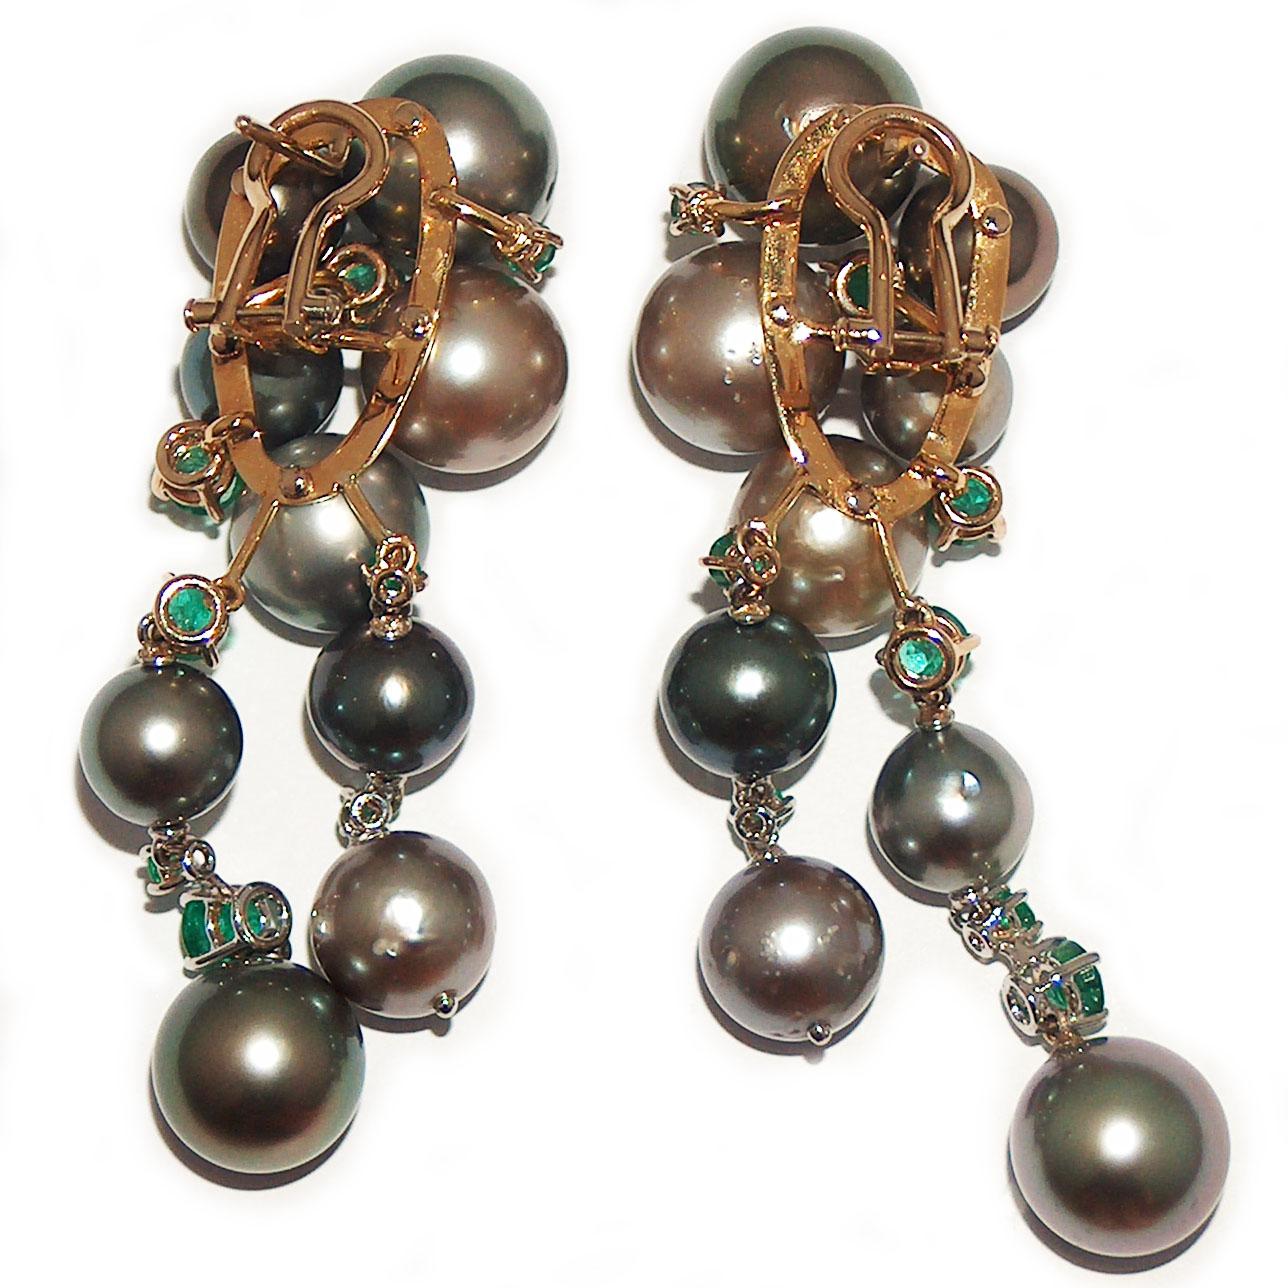 Earrings in 18kt yellow gold which sets White Diamonds for ct. 0,16, Emeralds for ct. 3,42 and Tahitian Pearls for ct. 101,00.

Unique piece, matching ring available.

Designed and handcrafted in Italy, by visionary goldsmith Paolo Piovan. 

Classic